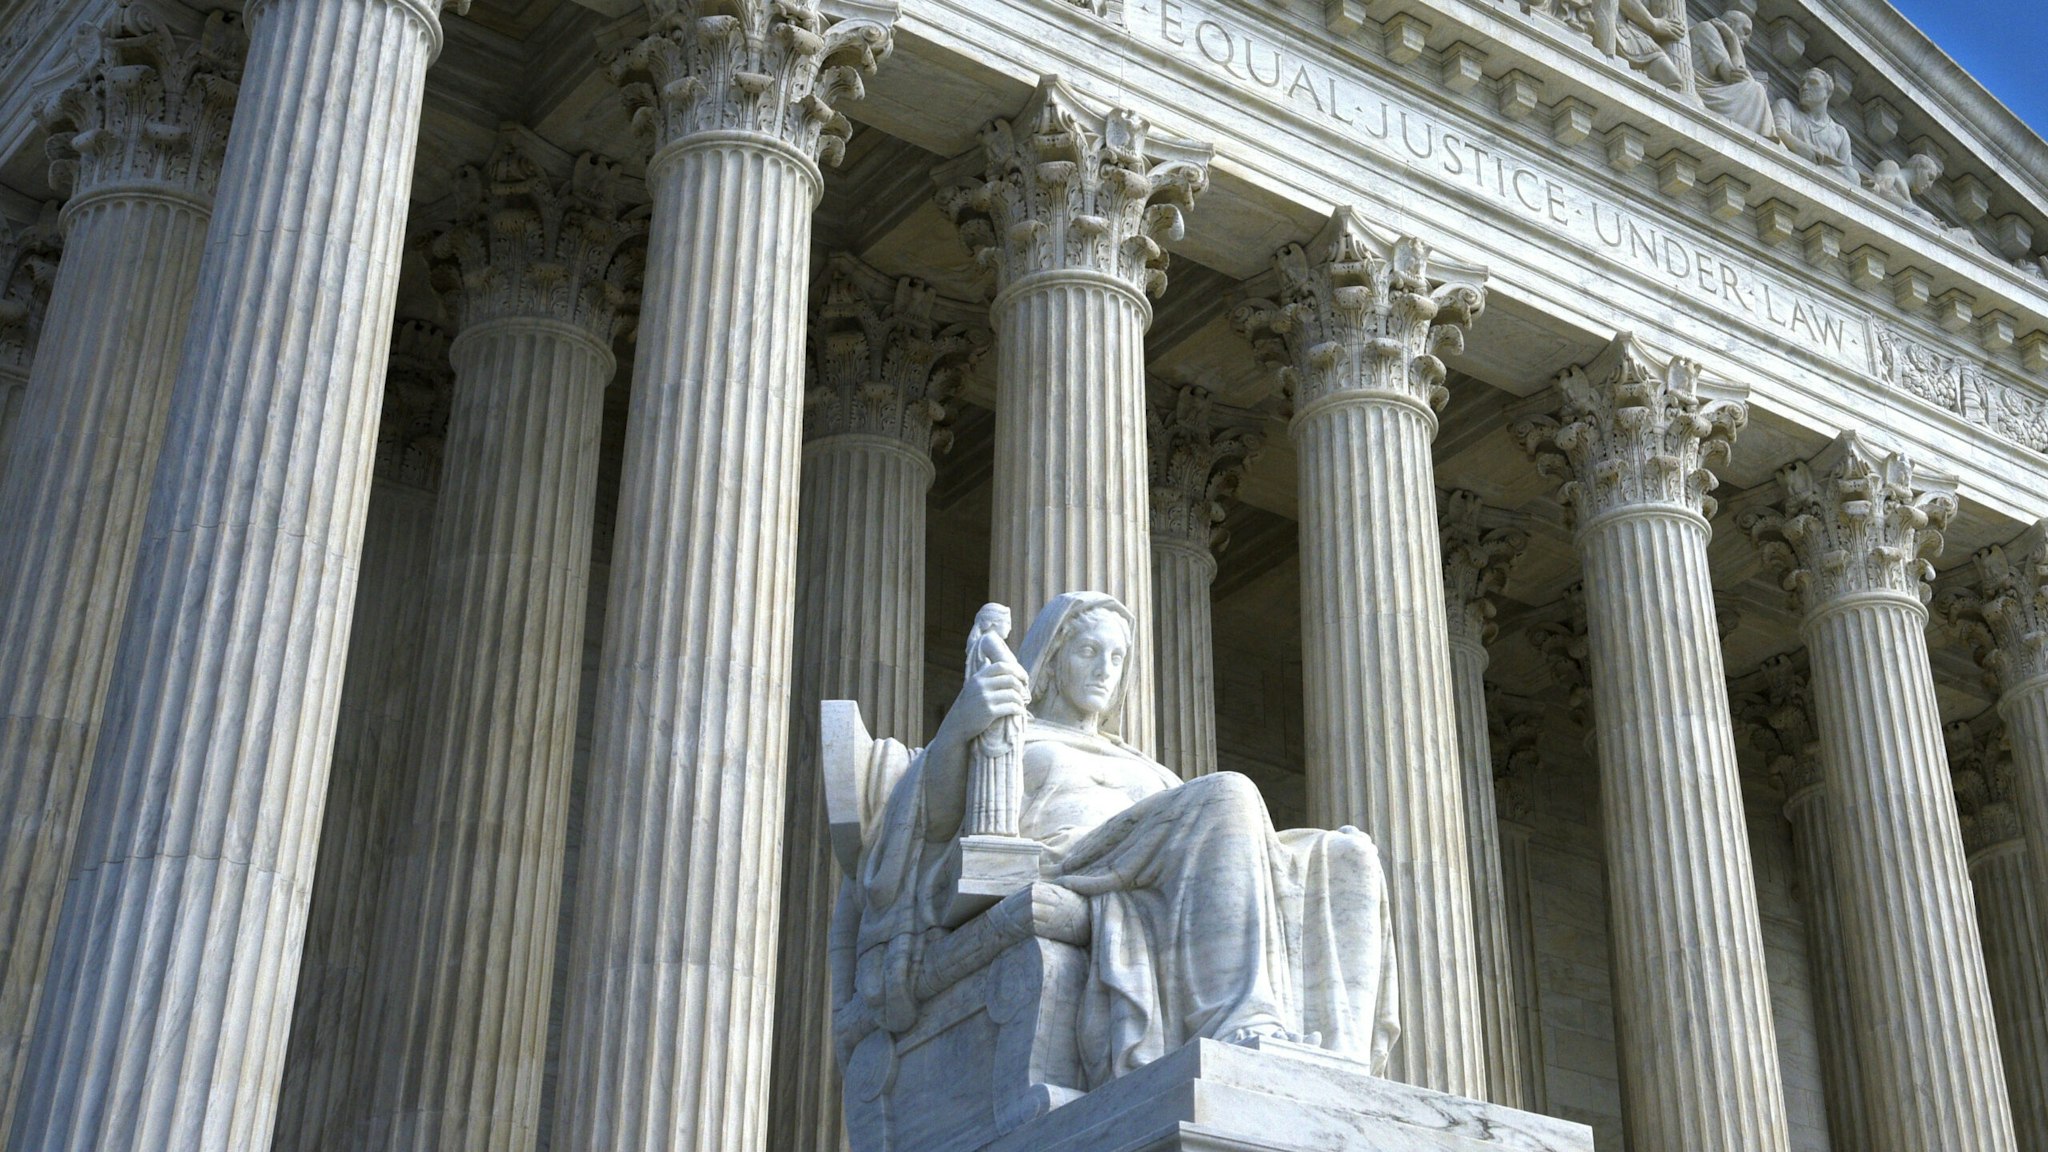 WASHINGTON, D.C. - APRIL 19, 2018: The U.S. Supreme Court Building in Washington, D.C., is the seat of the Supreme Court of the United States and the Judicial Branch of government.